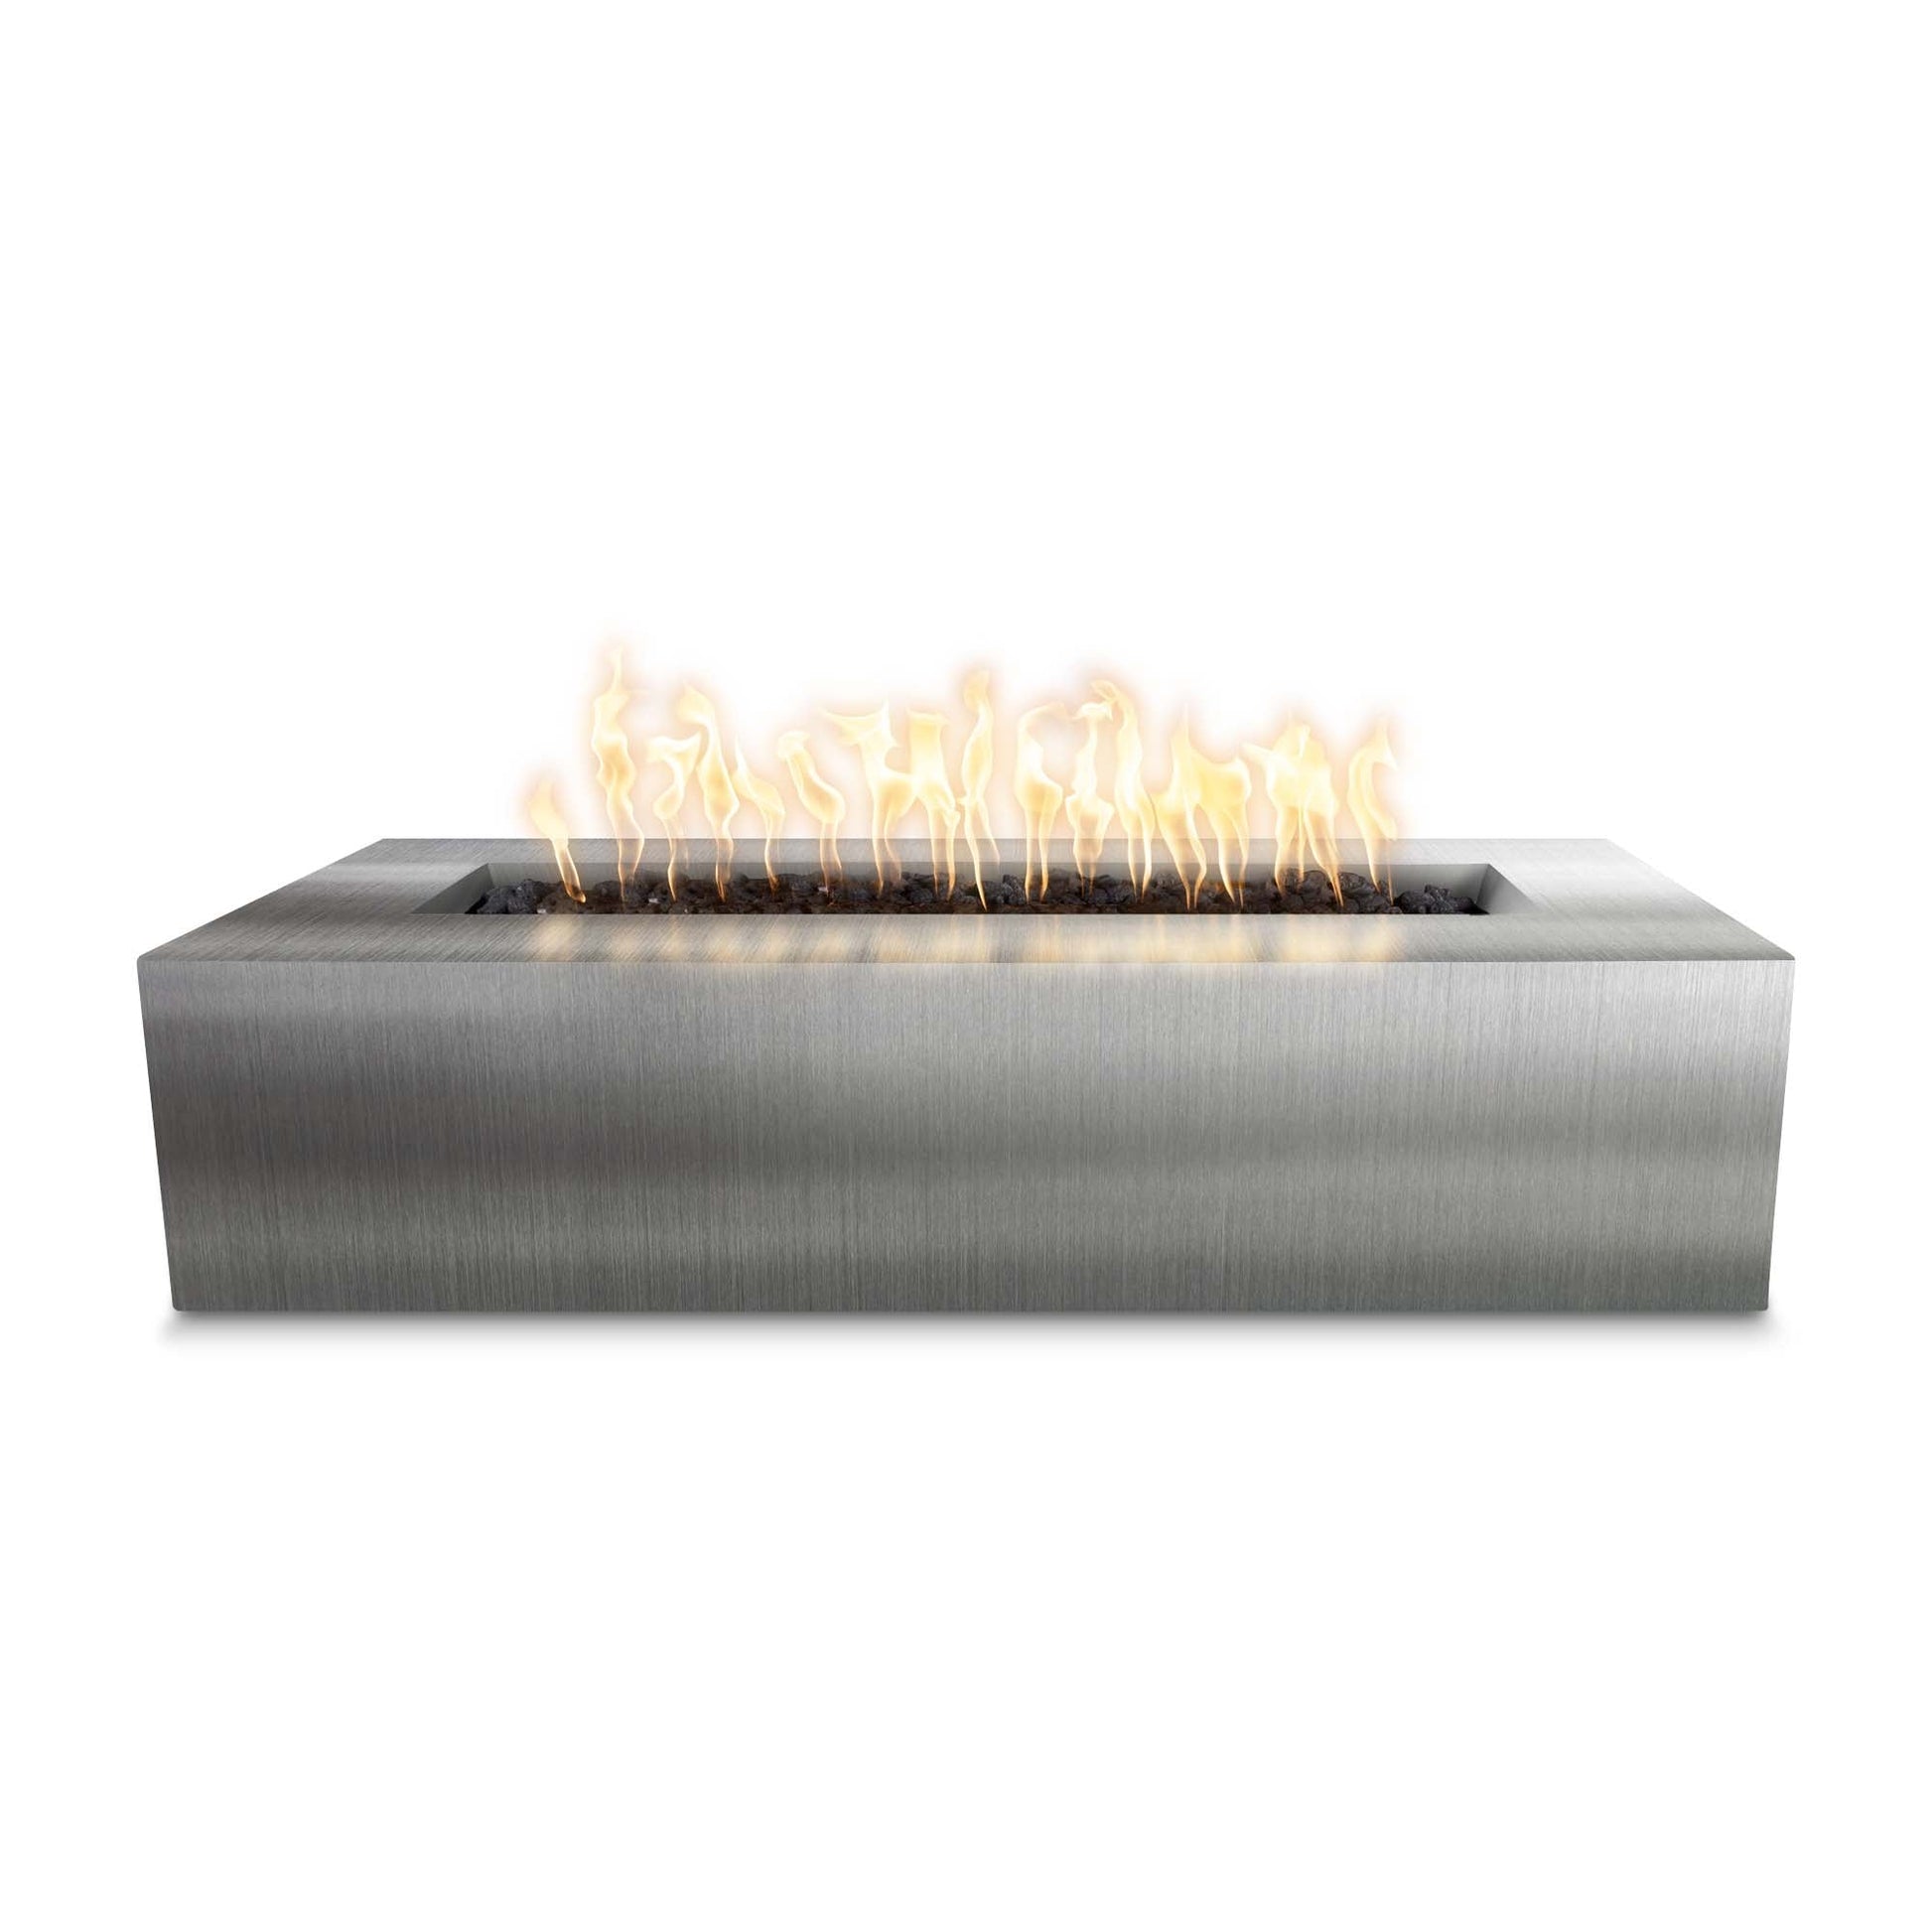 The Outdoor Plus Rectangular Regal 54" Stainless Steel Liquid Propane Fire Pit with 110V Electronic Ignition